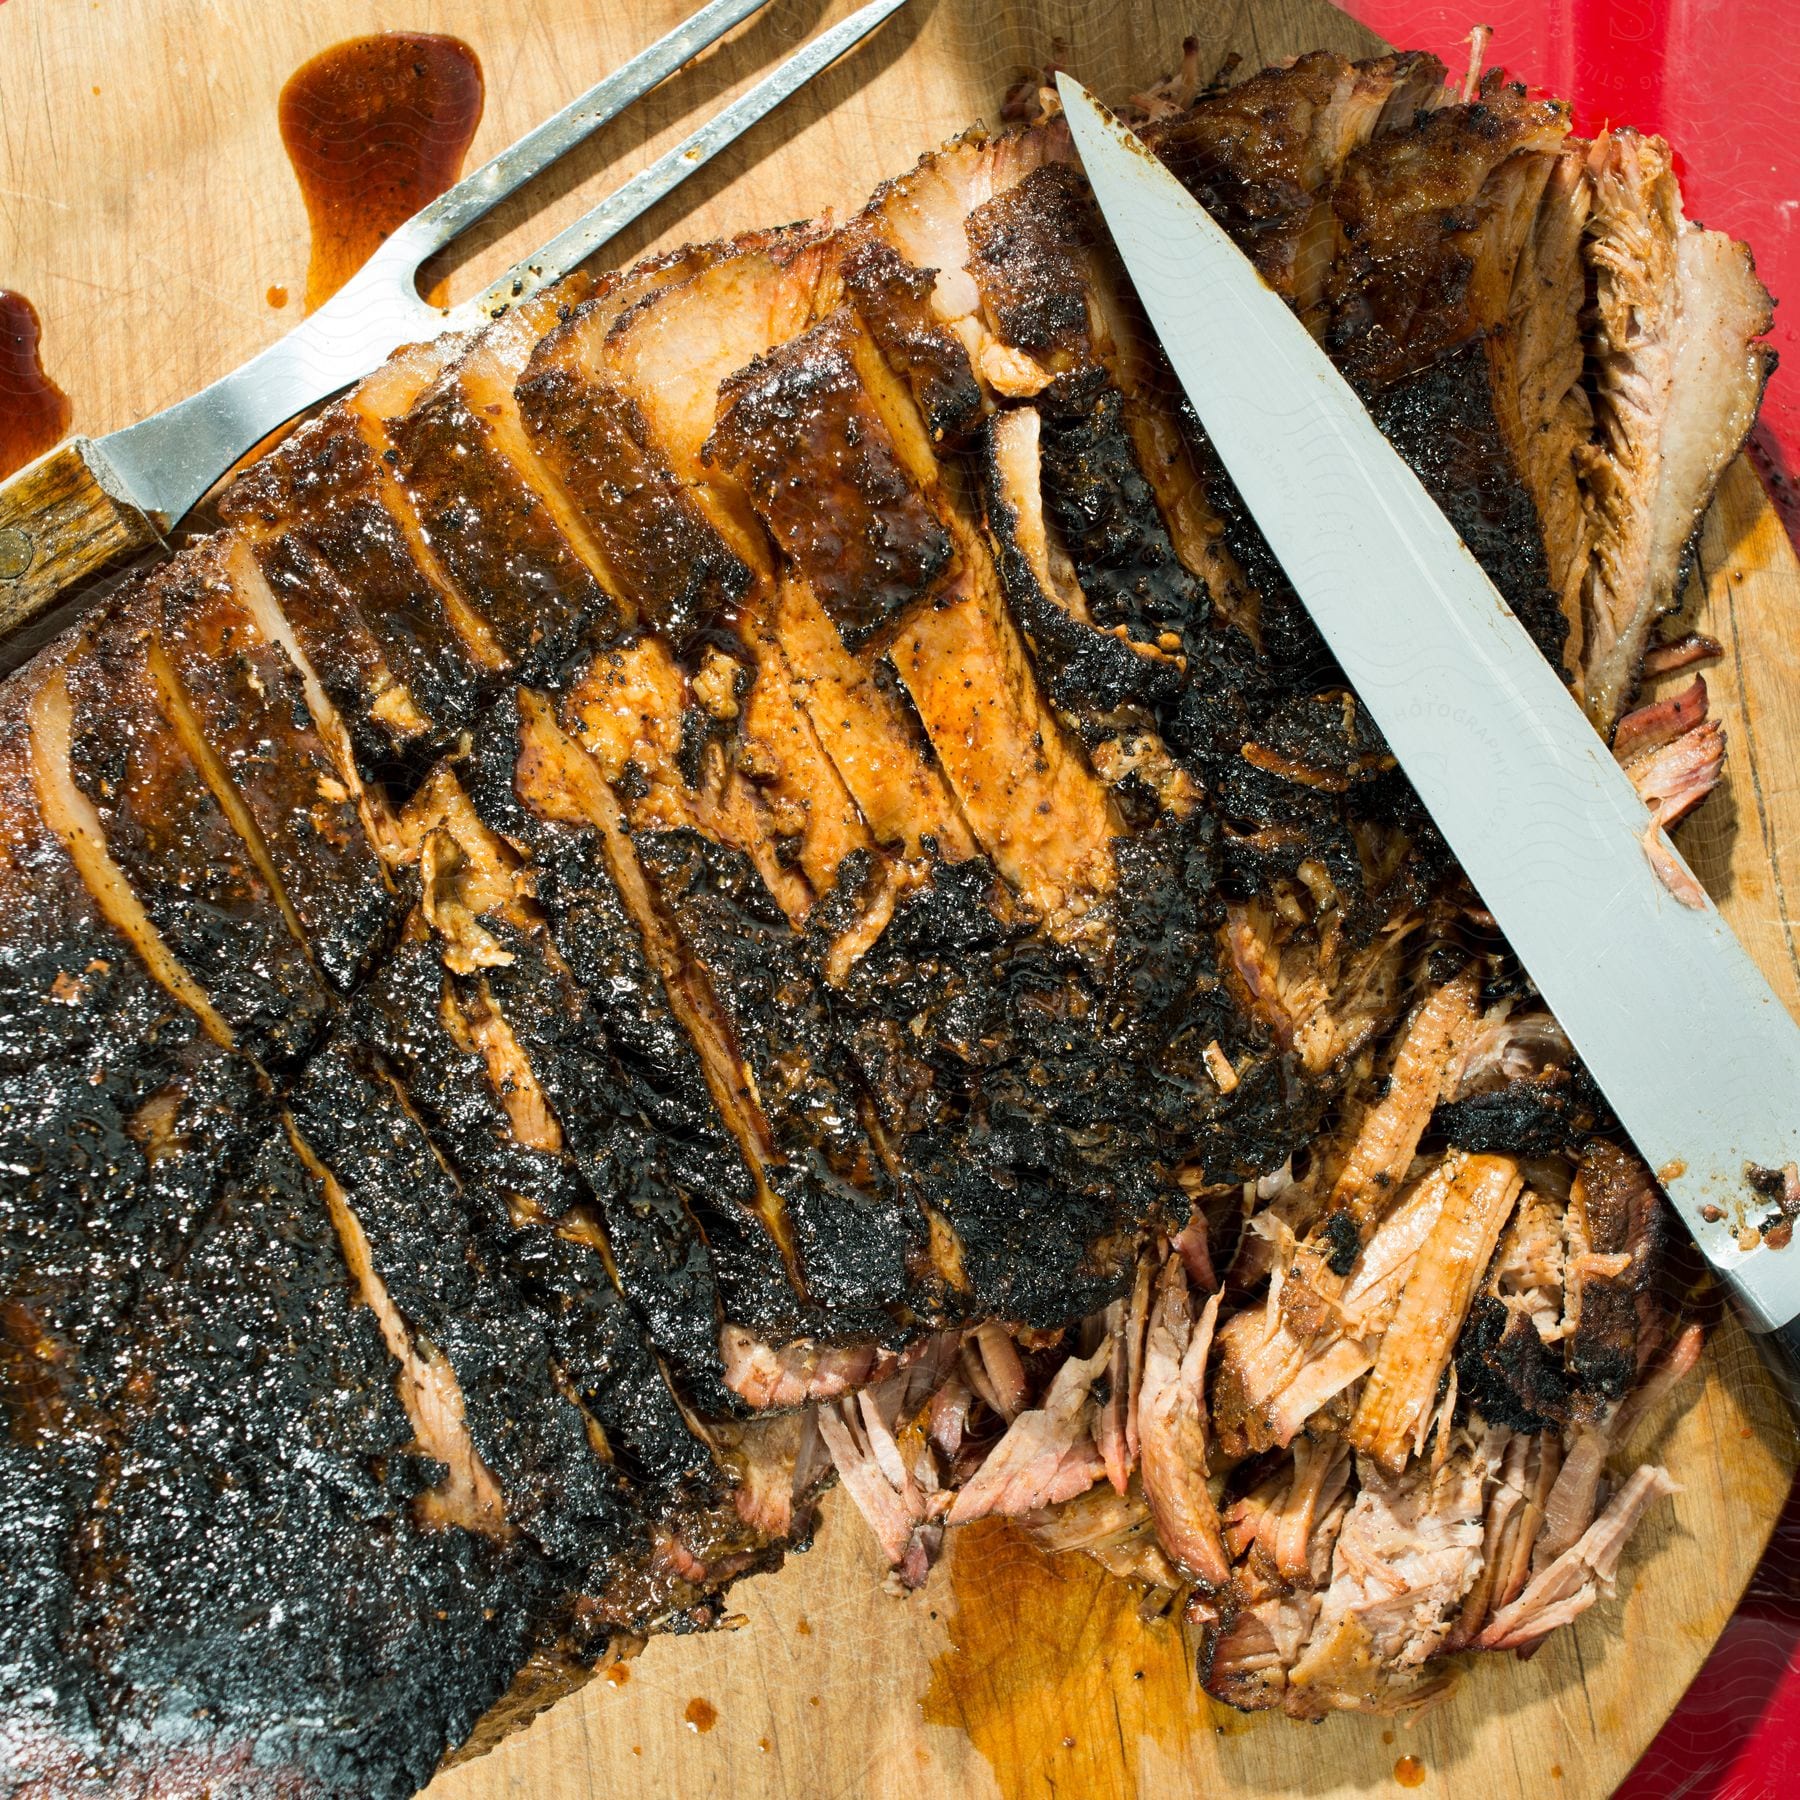 A closeup view of sliced brisket and a knife